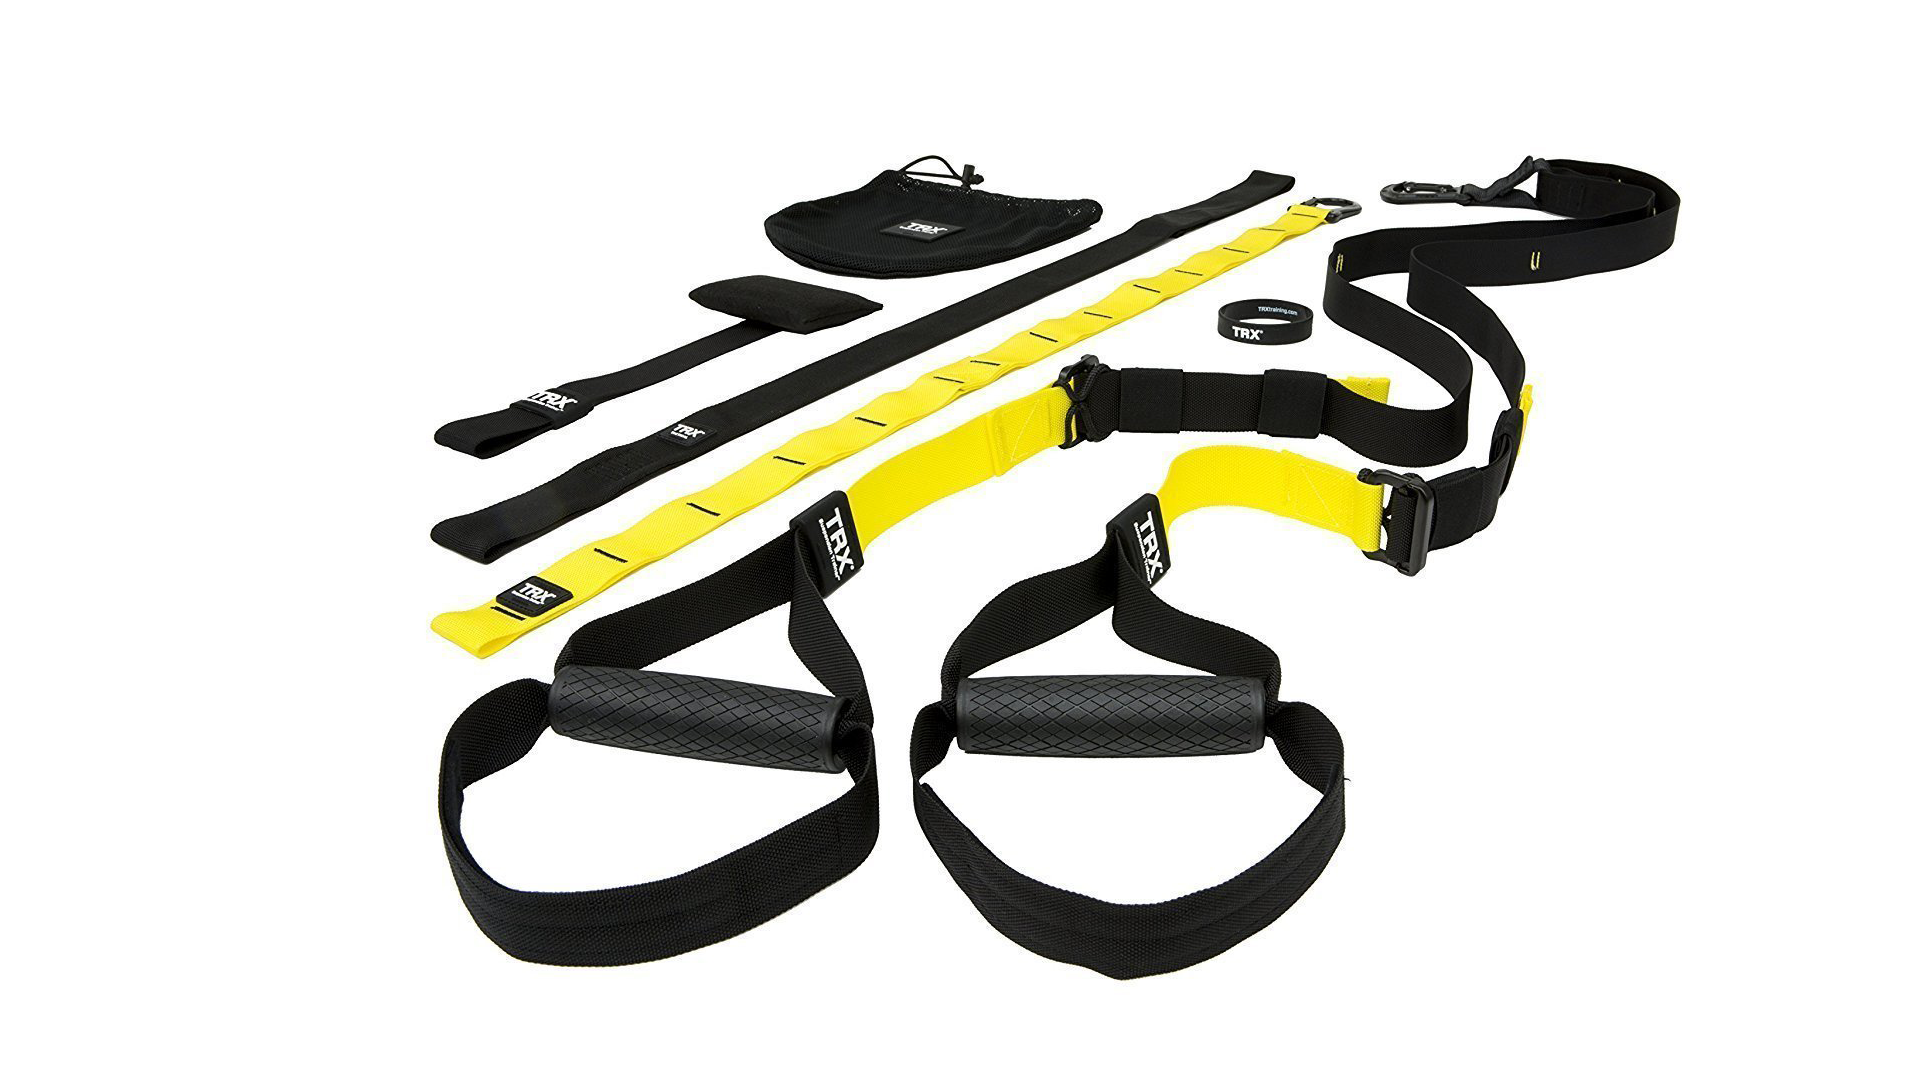 TRX Training PRO3 Suspension Trainer Kit, Train Like the Pros At Home